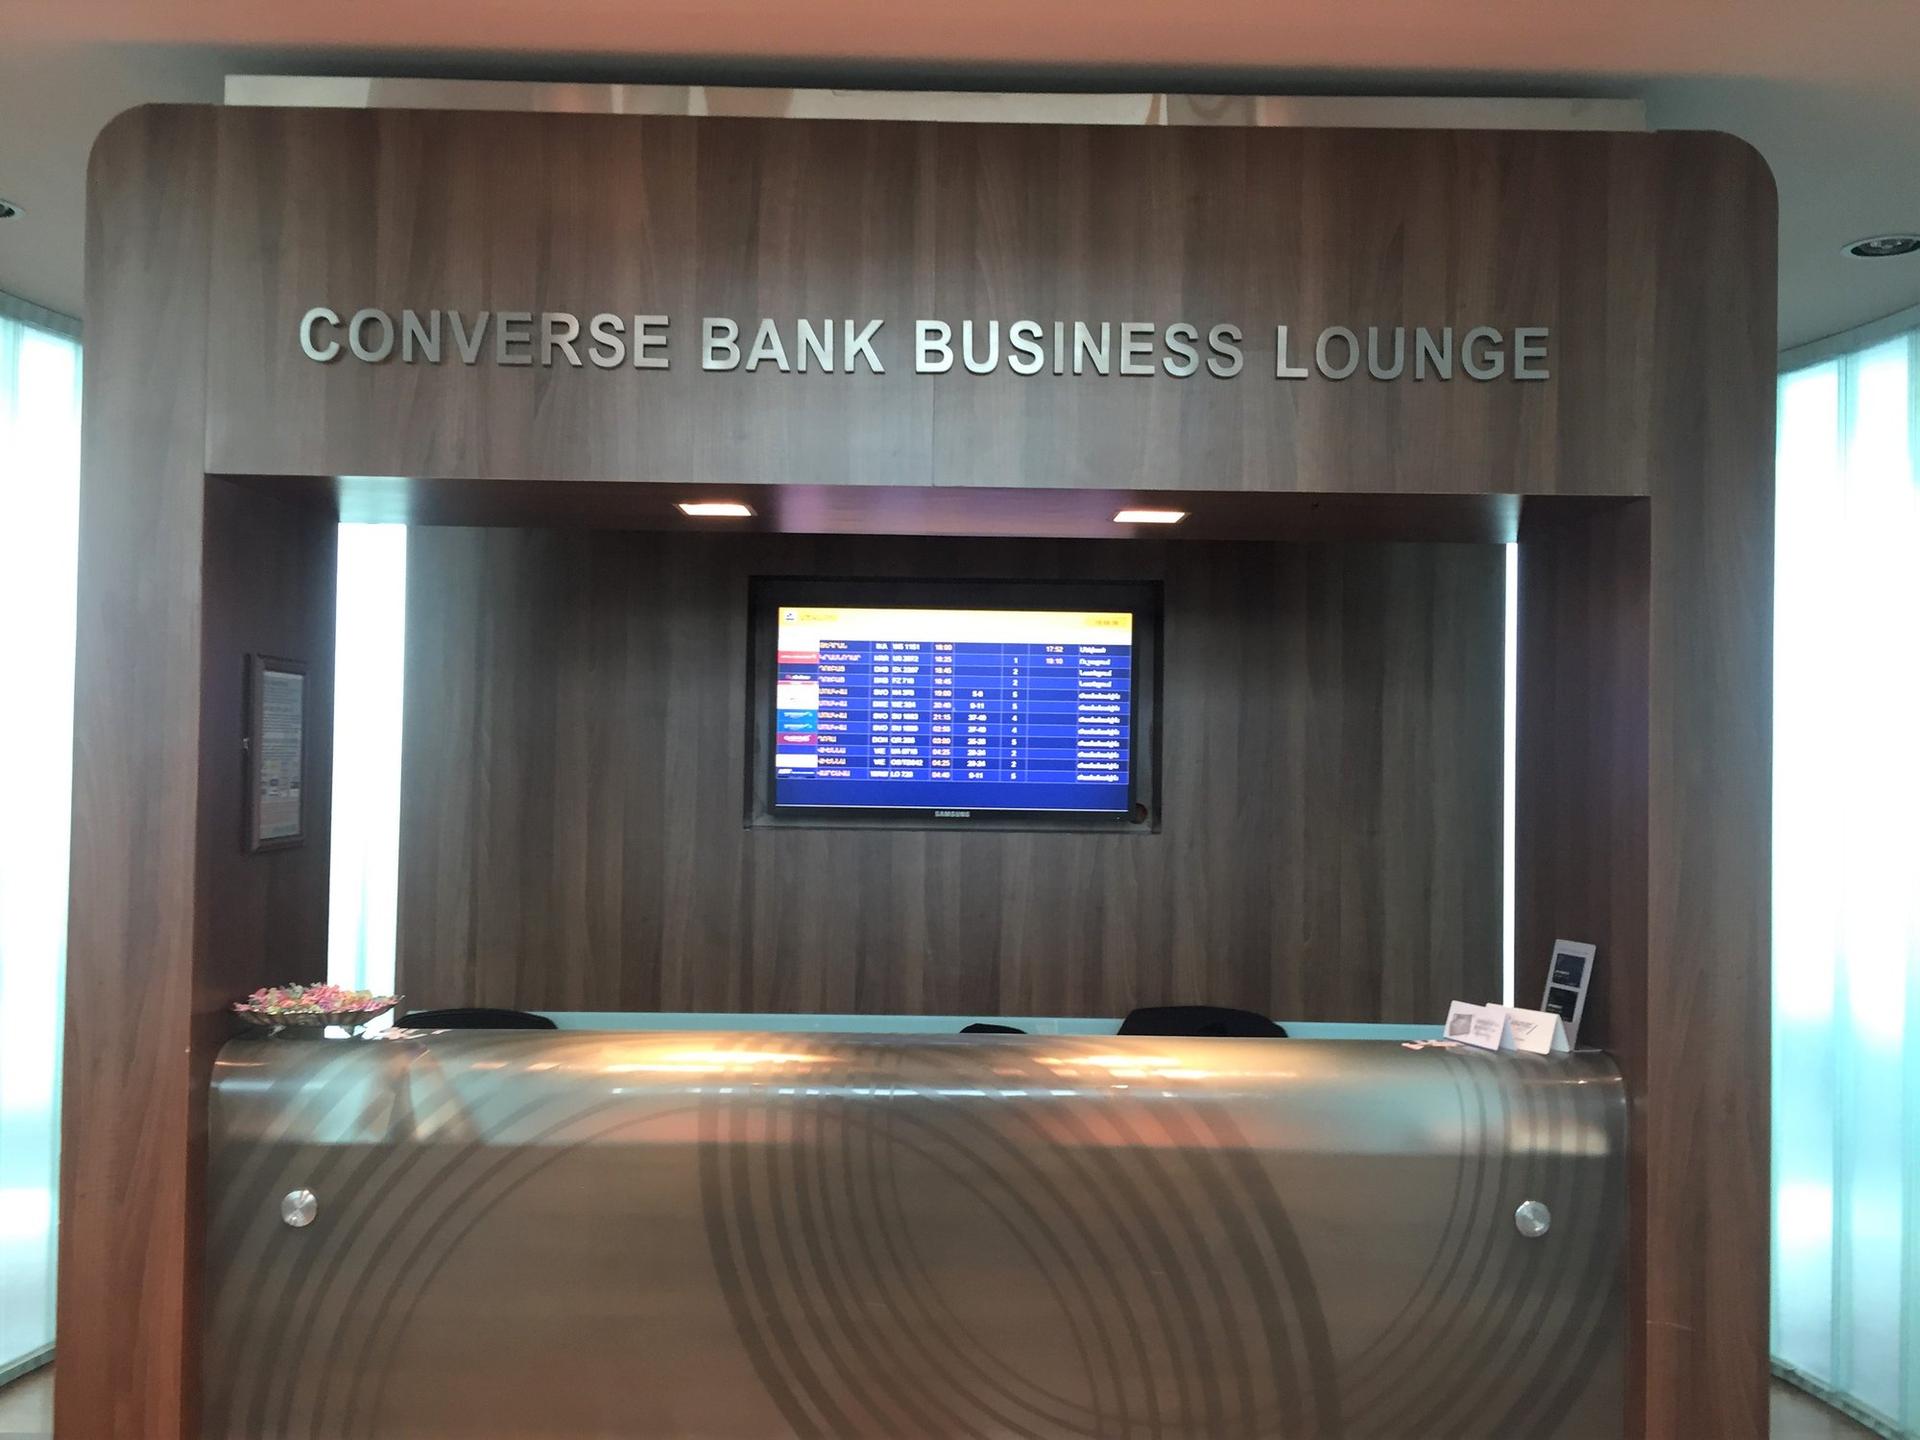 Converse Bank Business Lounge image 13 of 21